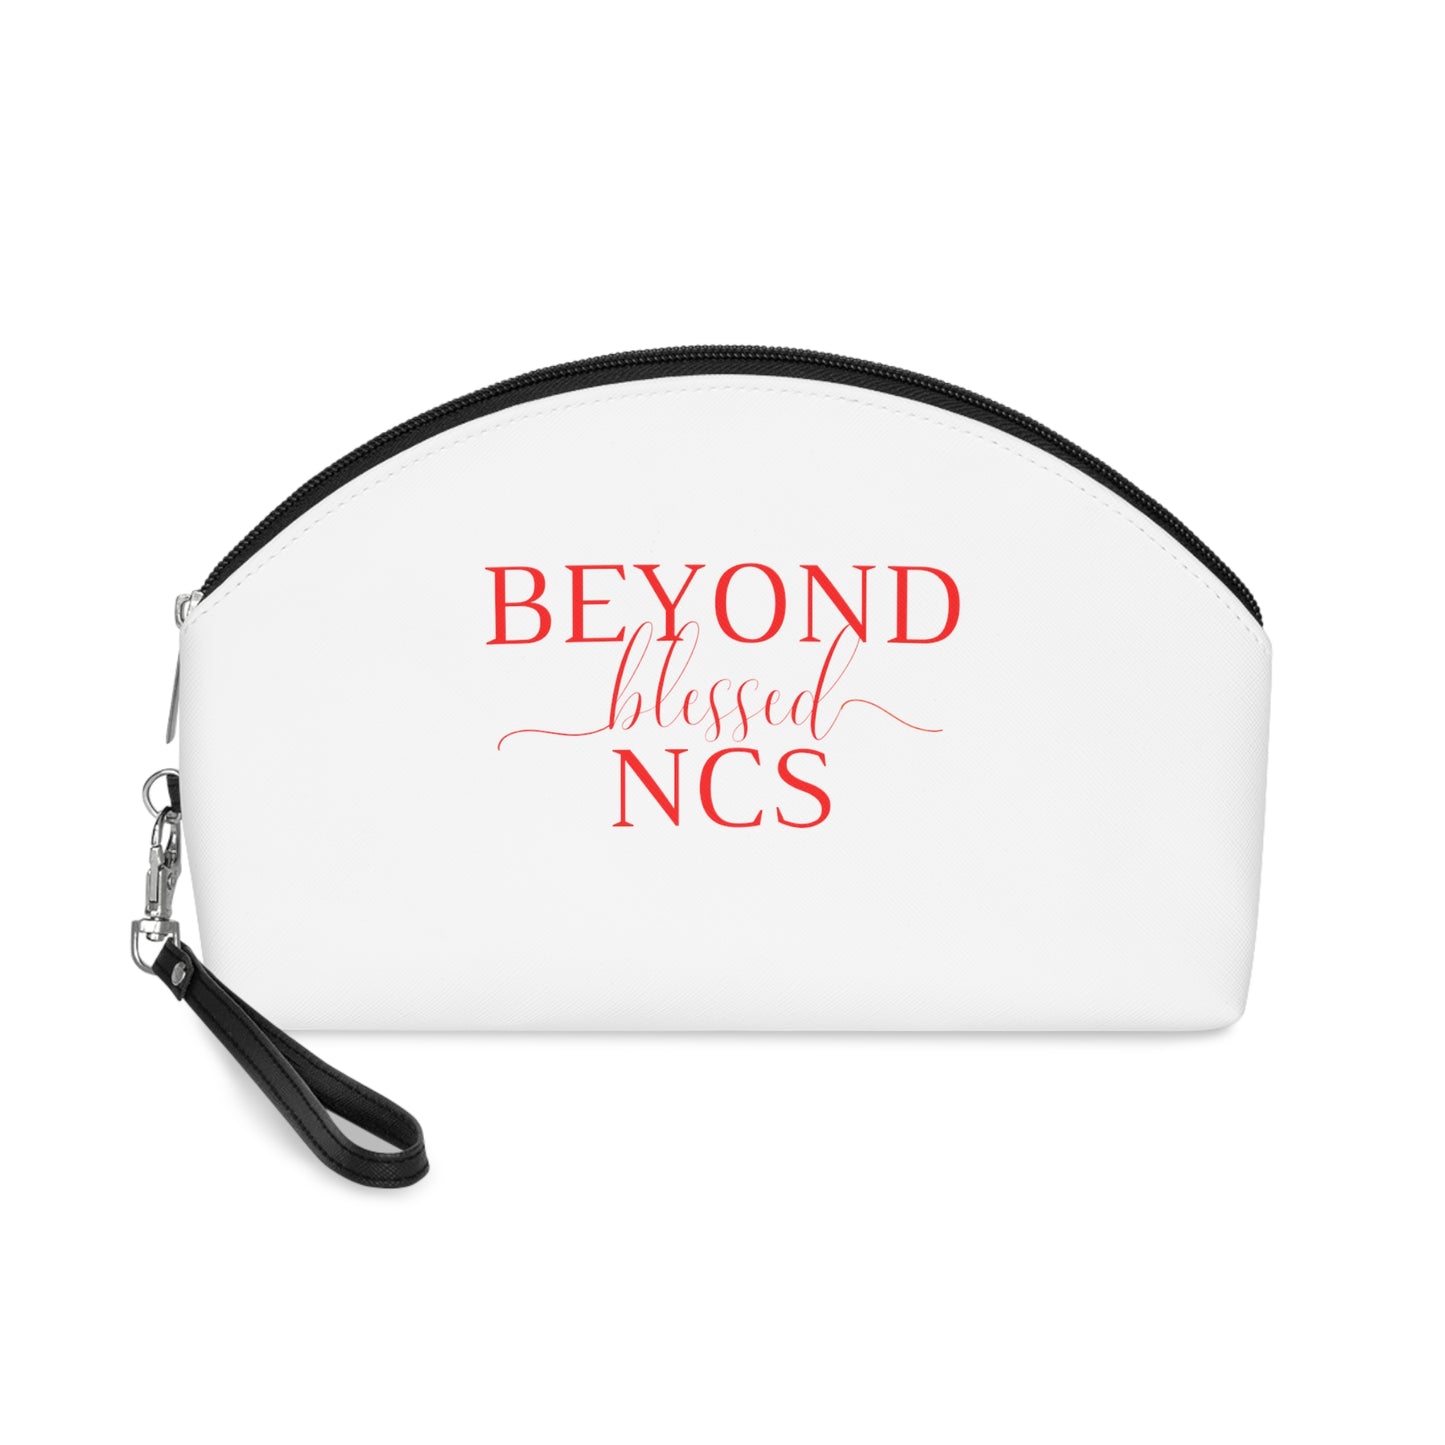 Beyond Blessed Doula - Makeup Bage - Red